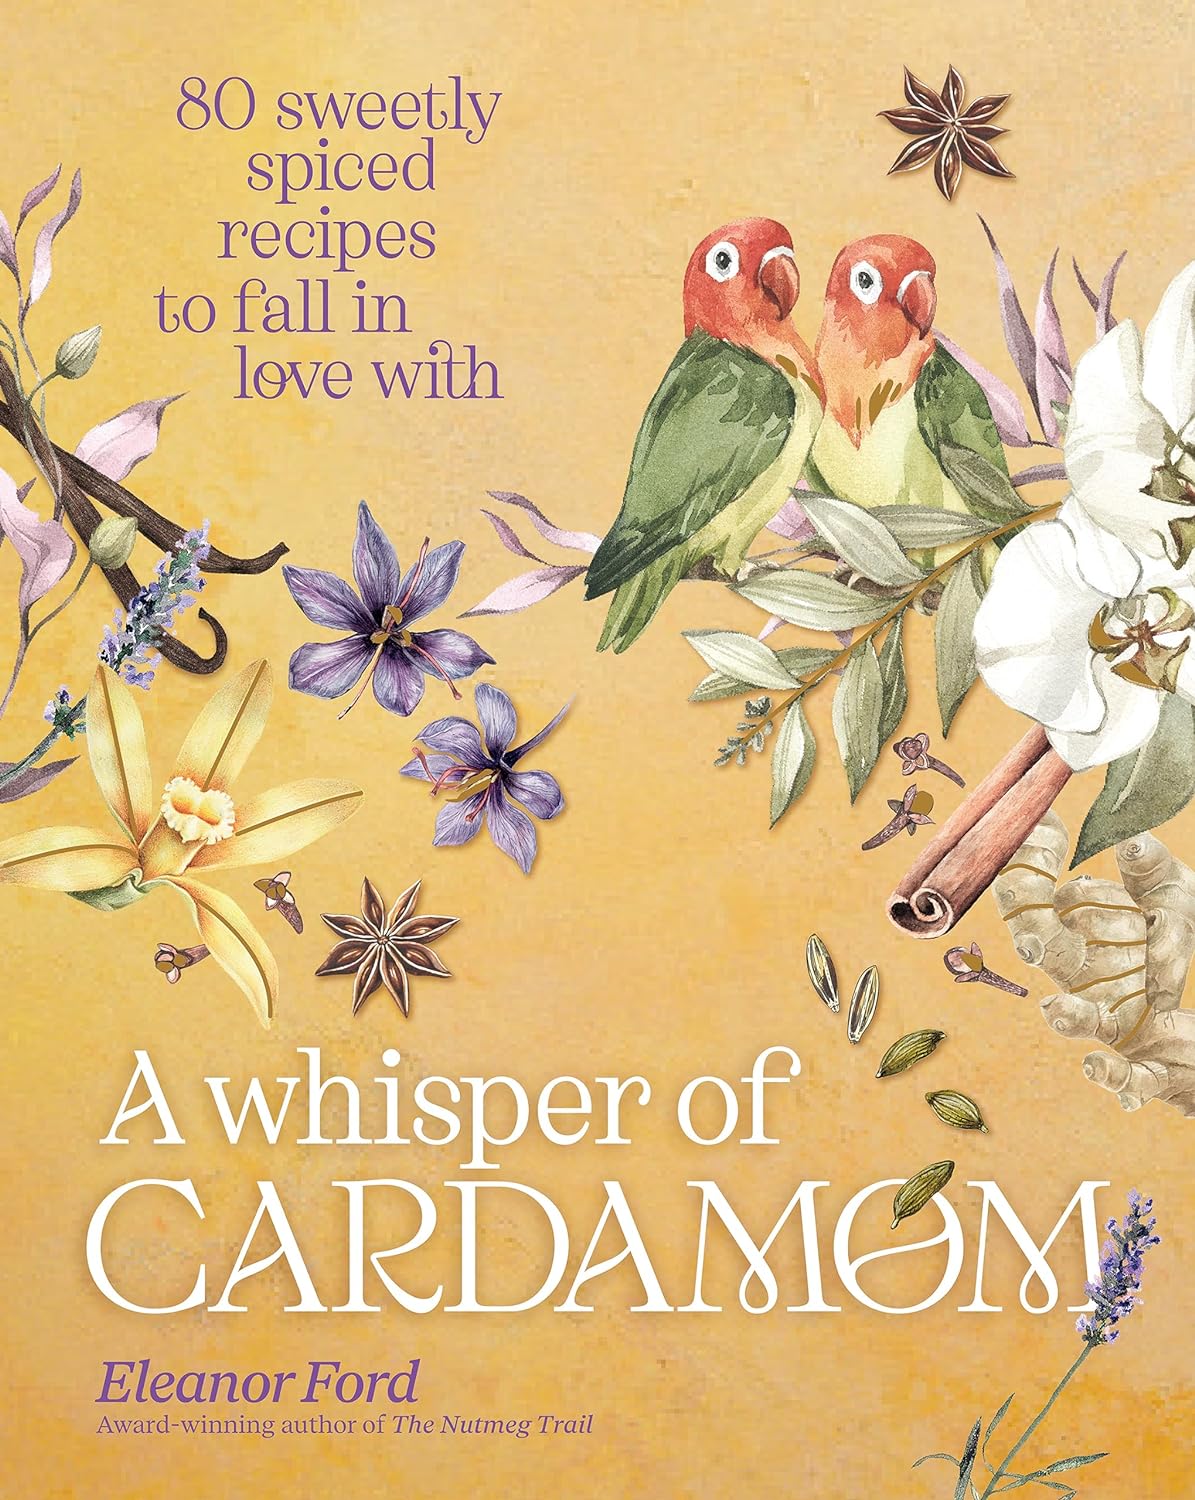 A Whisper of Cardamom: 80 Sweetly Spiced Recipes to Fall In Love With (Eleanor Ford)